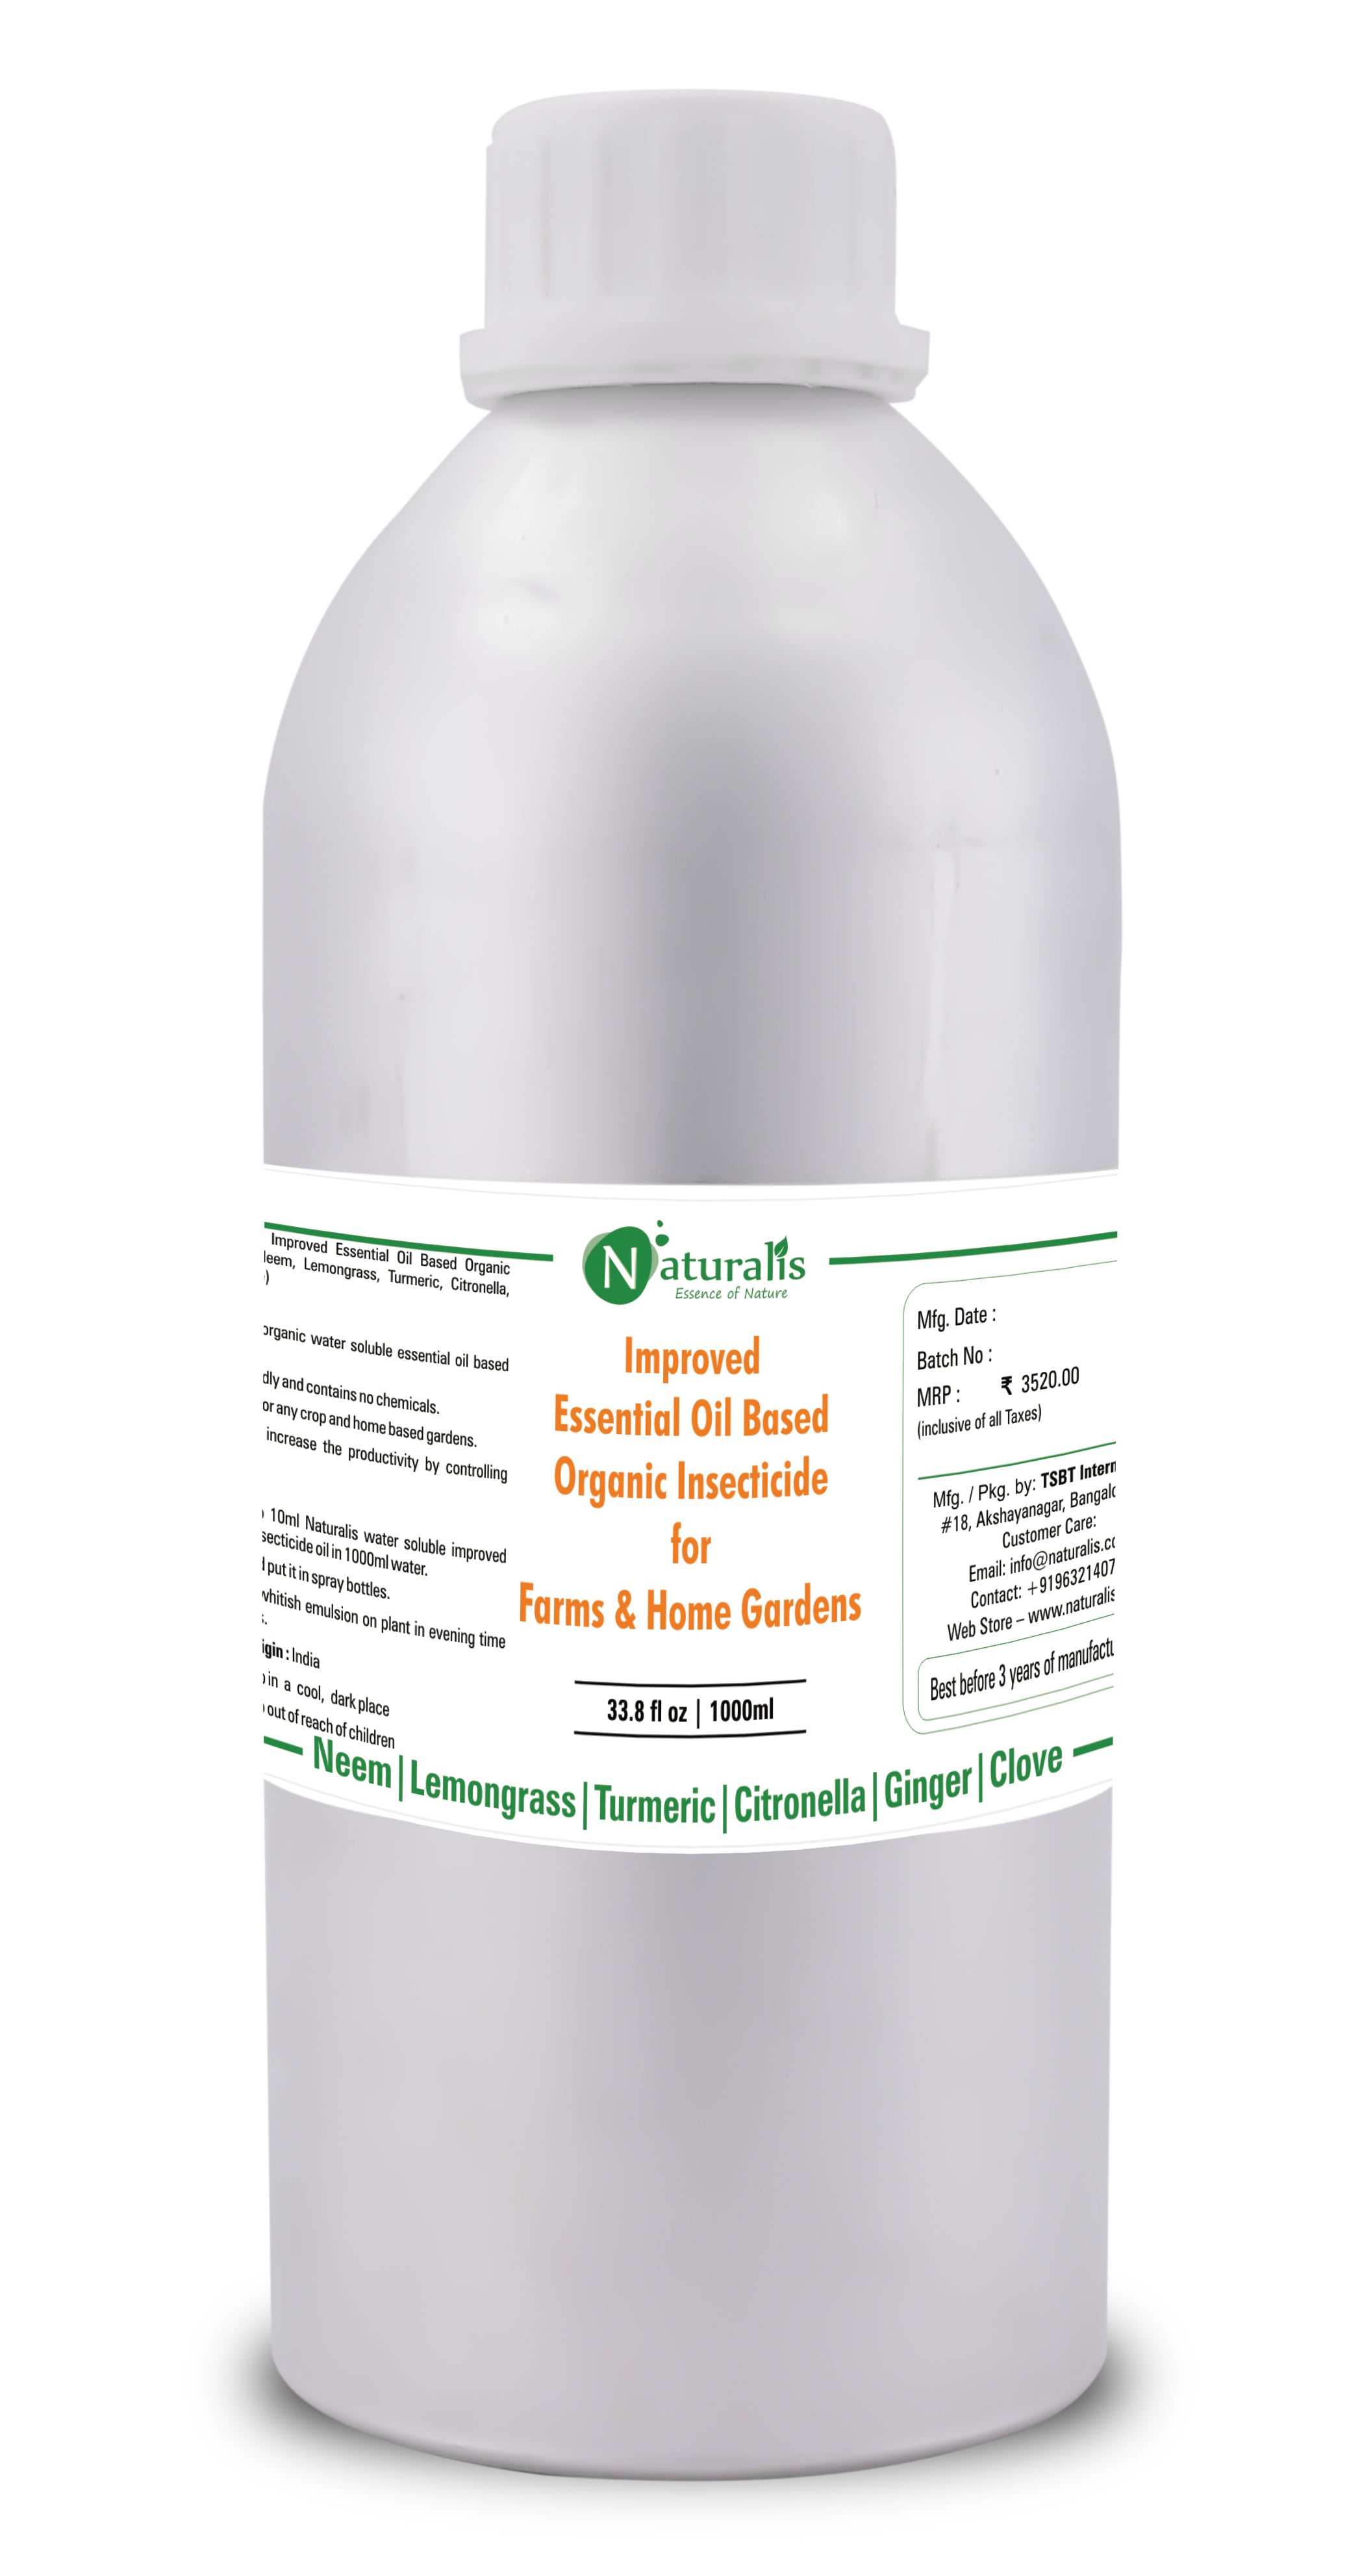 Naturalis New Improved Essential Oil Based Organic Insecticide (Neem, Lemongrass, Citronella, Turmeric) Farms & Home Gardens - Naturalis